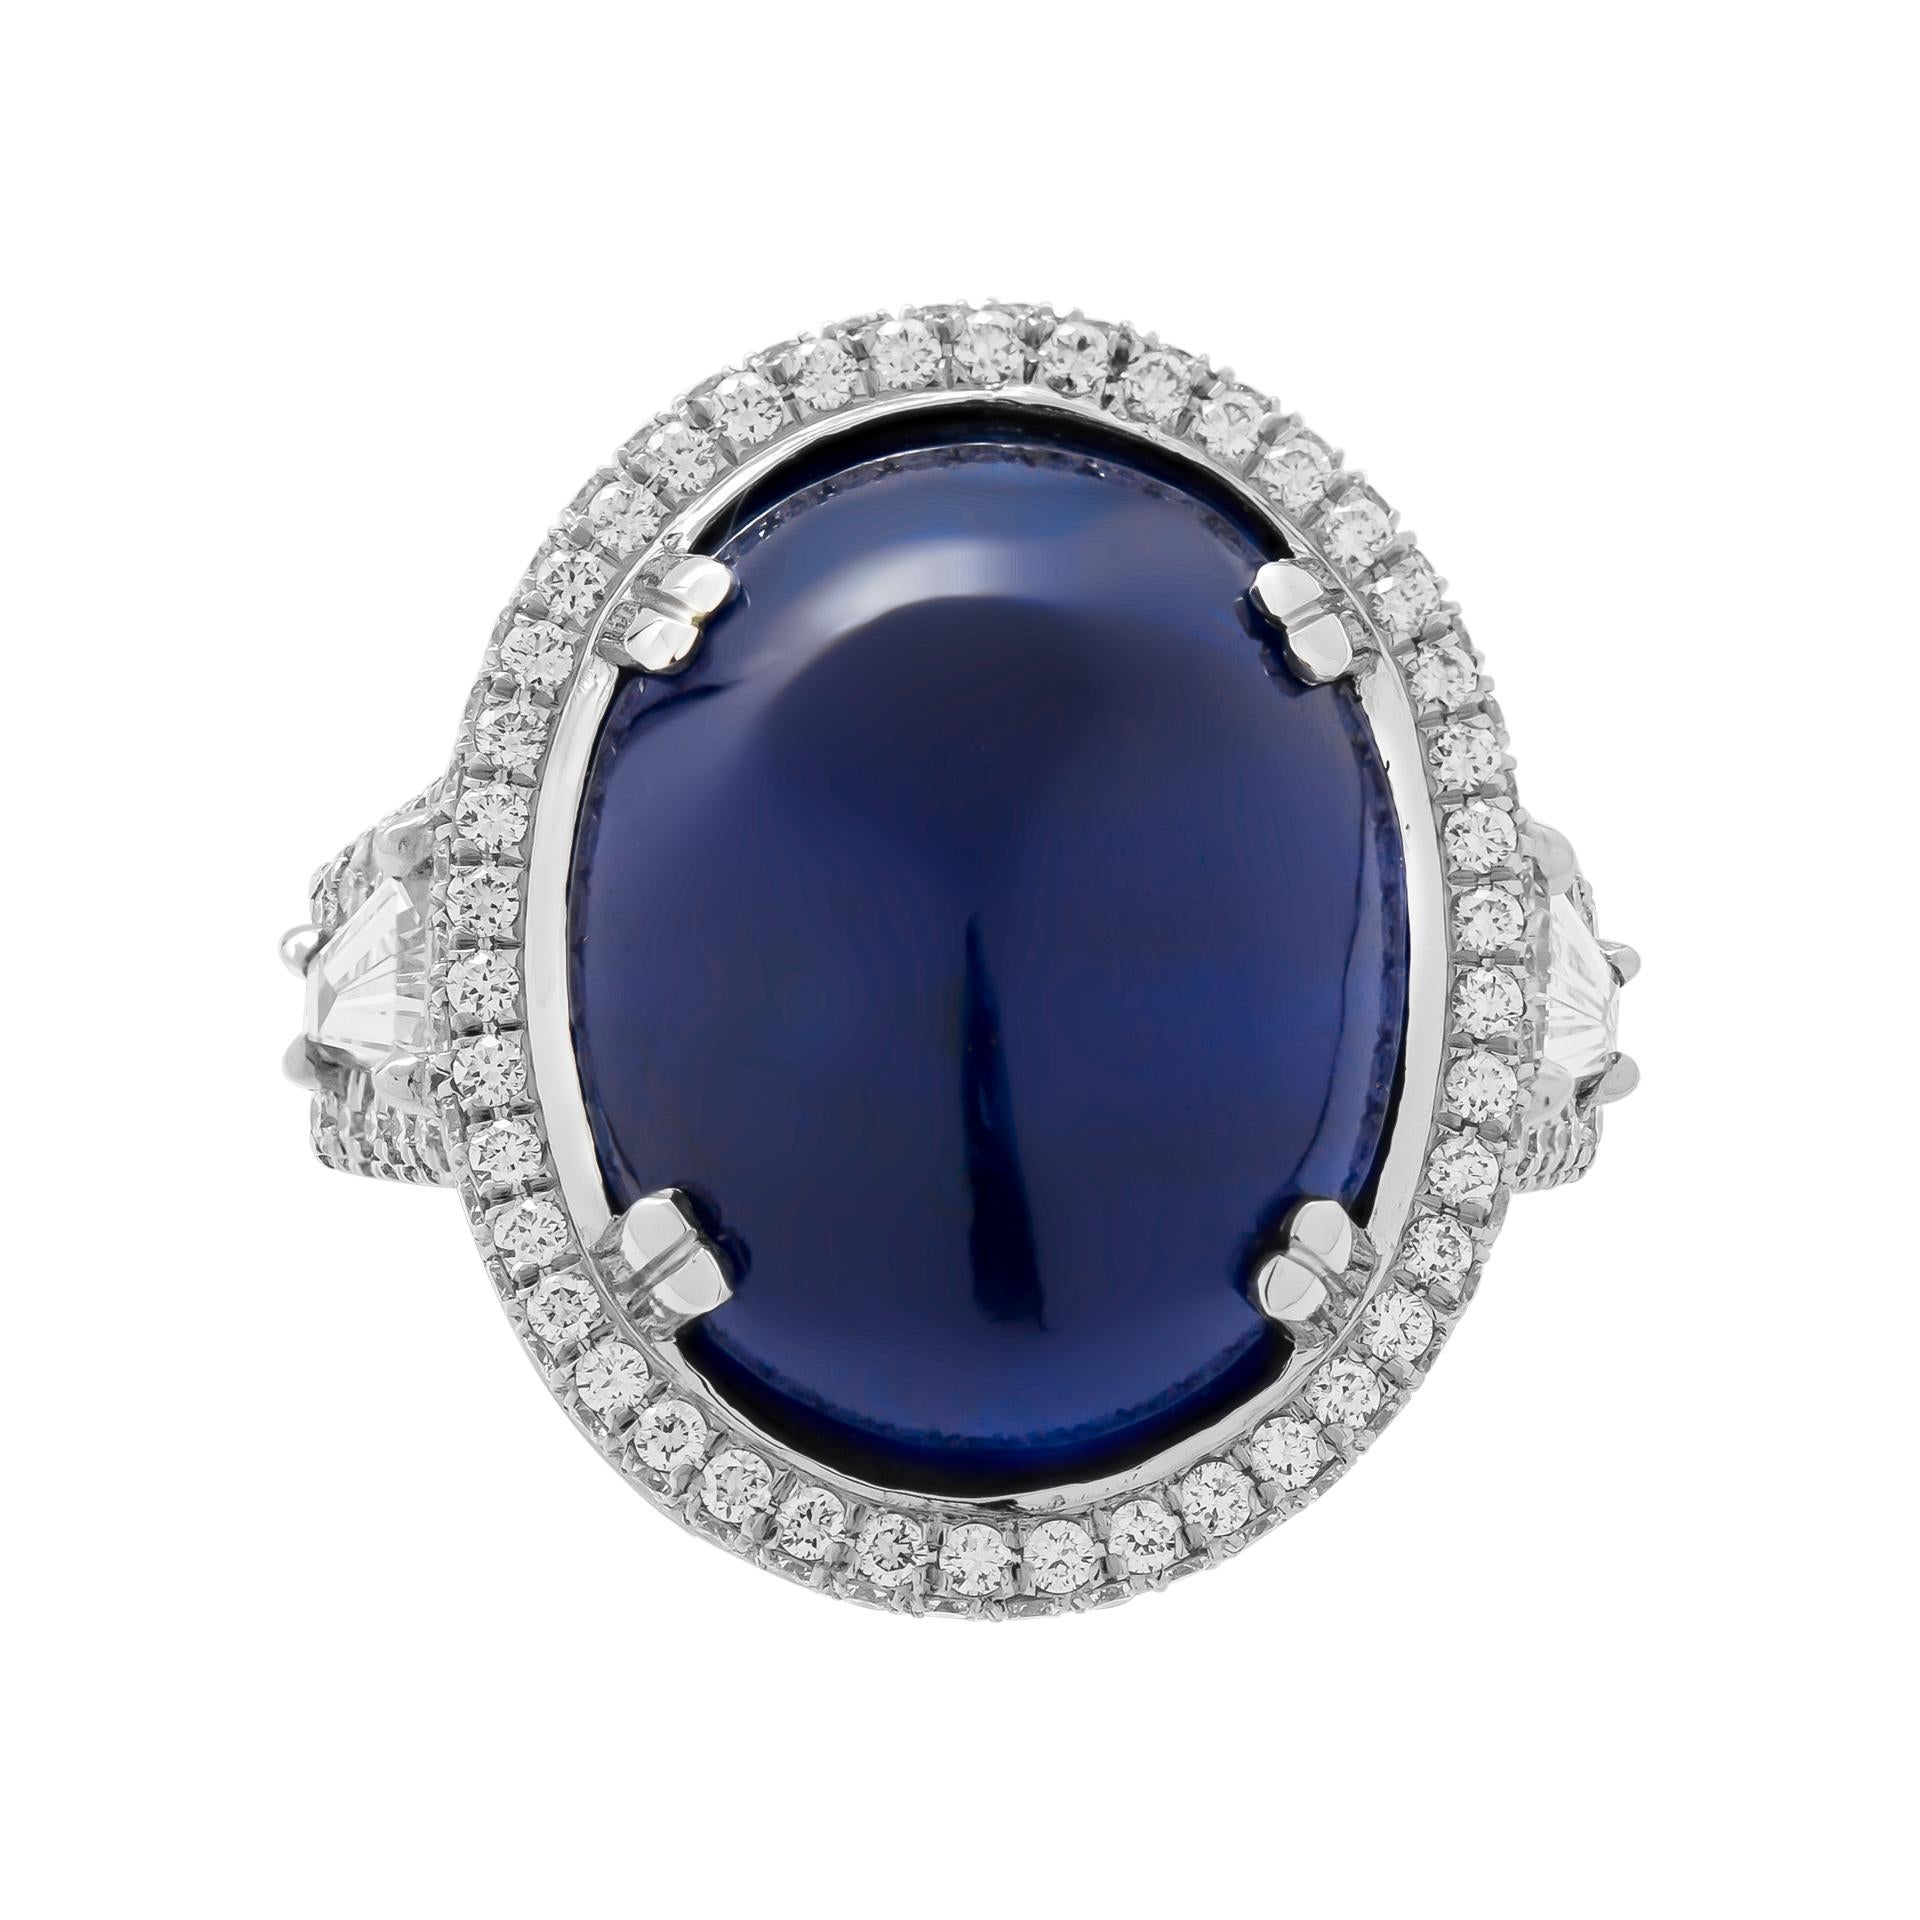 GIA Certified 30.18 Carat Oval Sapphire Cabochon Diamond Cocktail Ring
Crafted in Platinum
Size 6 (sizable)
Center stone: 30.18ct Blue Sapphire Double Cabochon (treatment: heated) GIA#6224222724
Side stones Baguettes: 1.07 total carat weight
Small